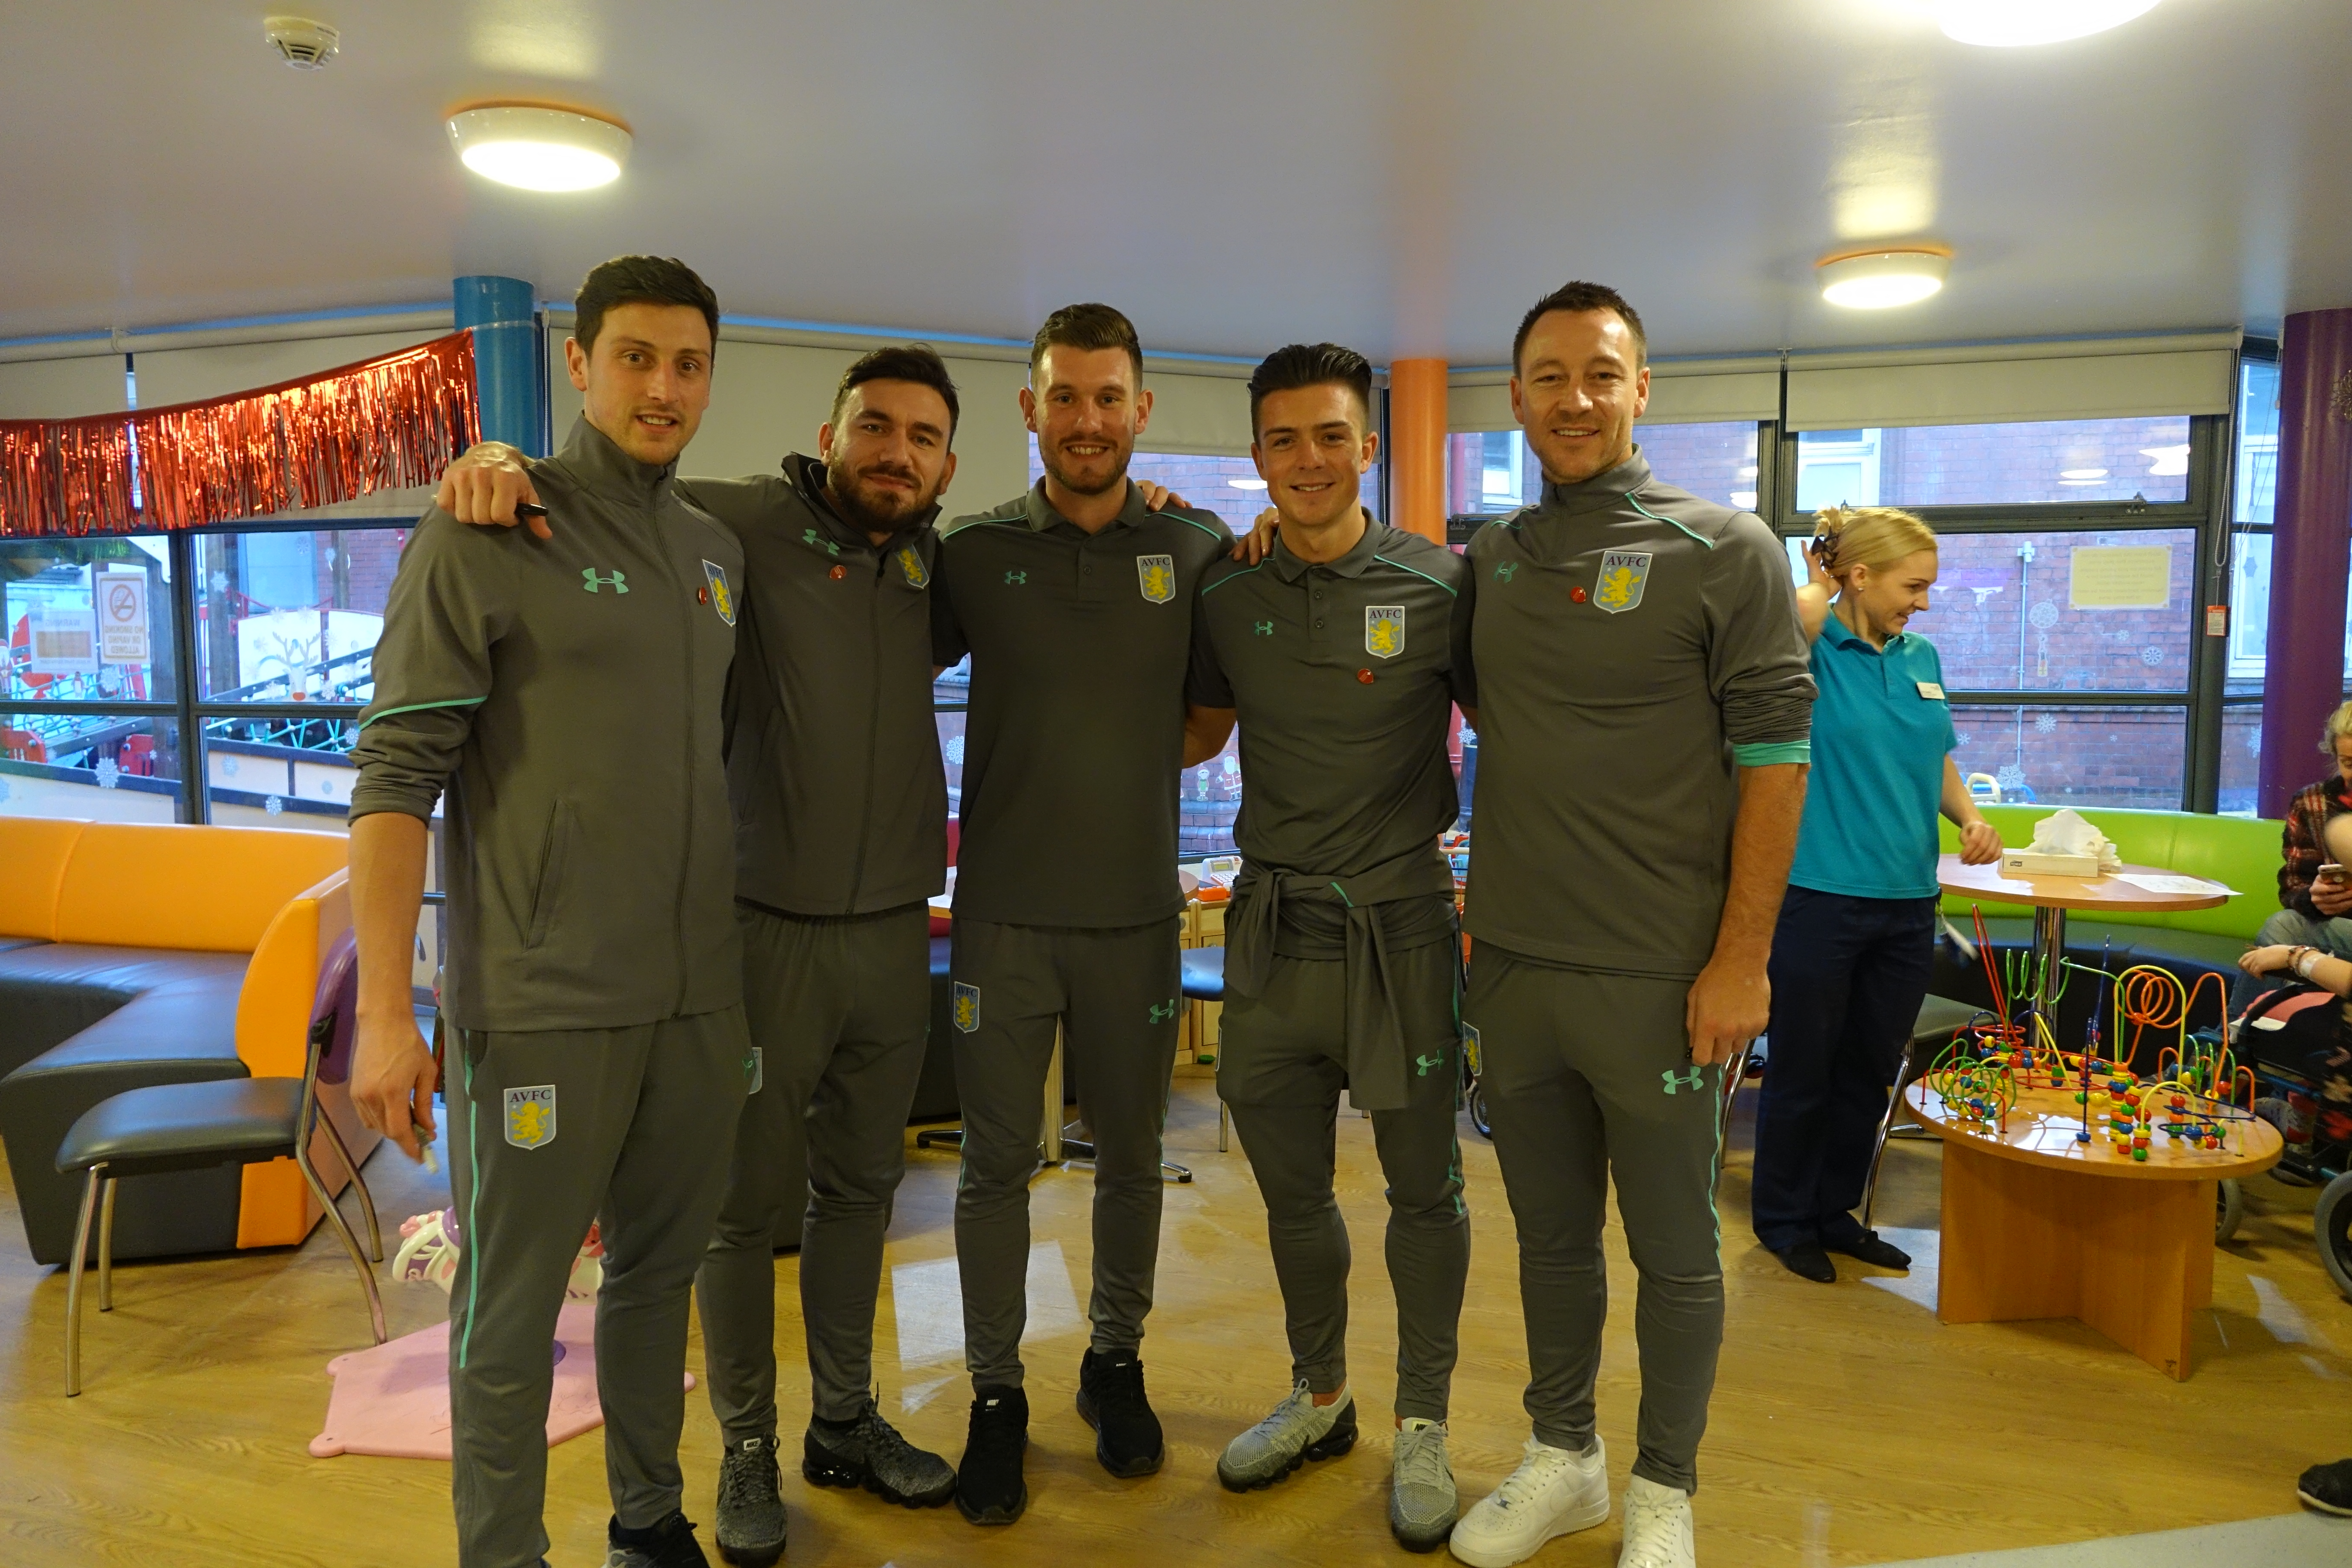 Team players from Aston Villa FC visited Birmingham Children's Hospital and Acorn's Children's Hospice in the West Midlands to spread Christmas cheer